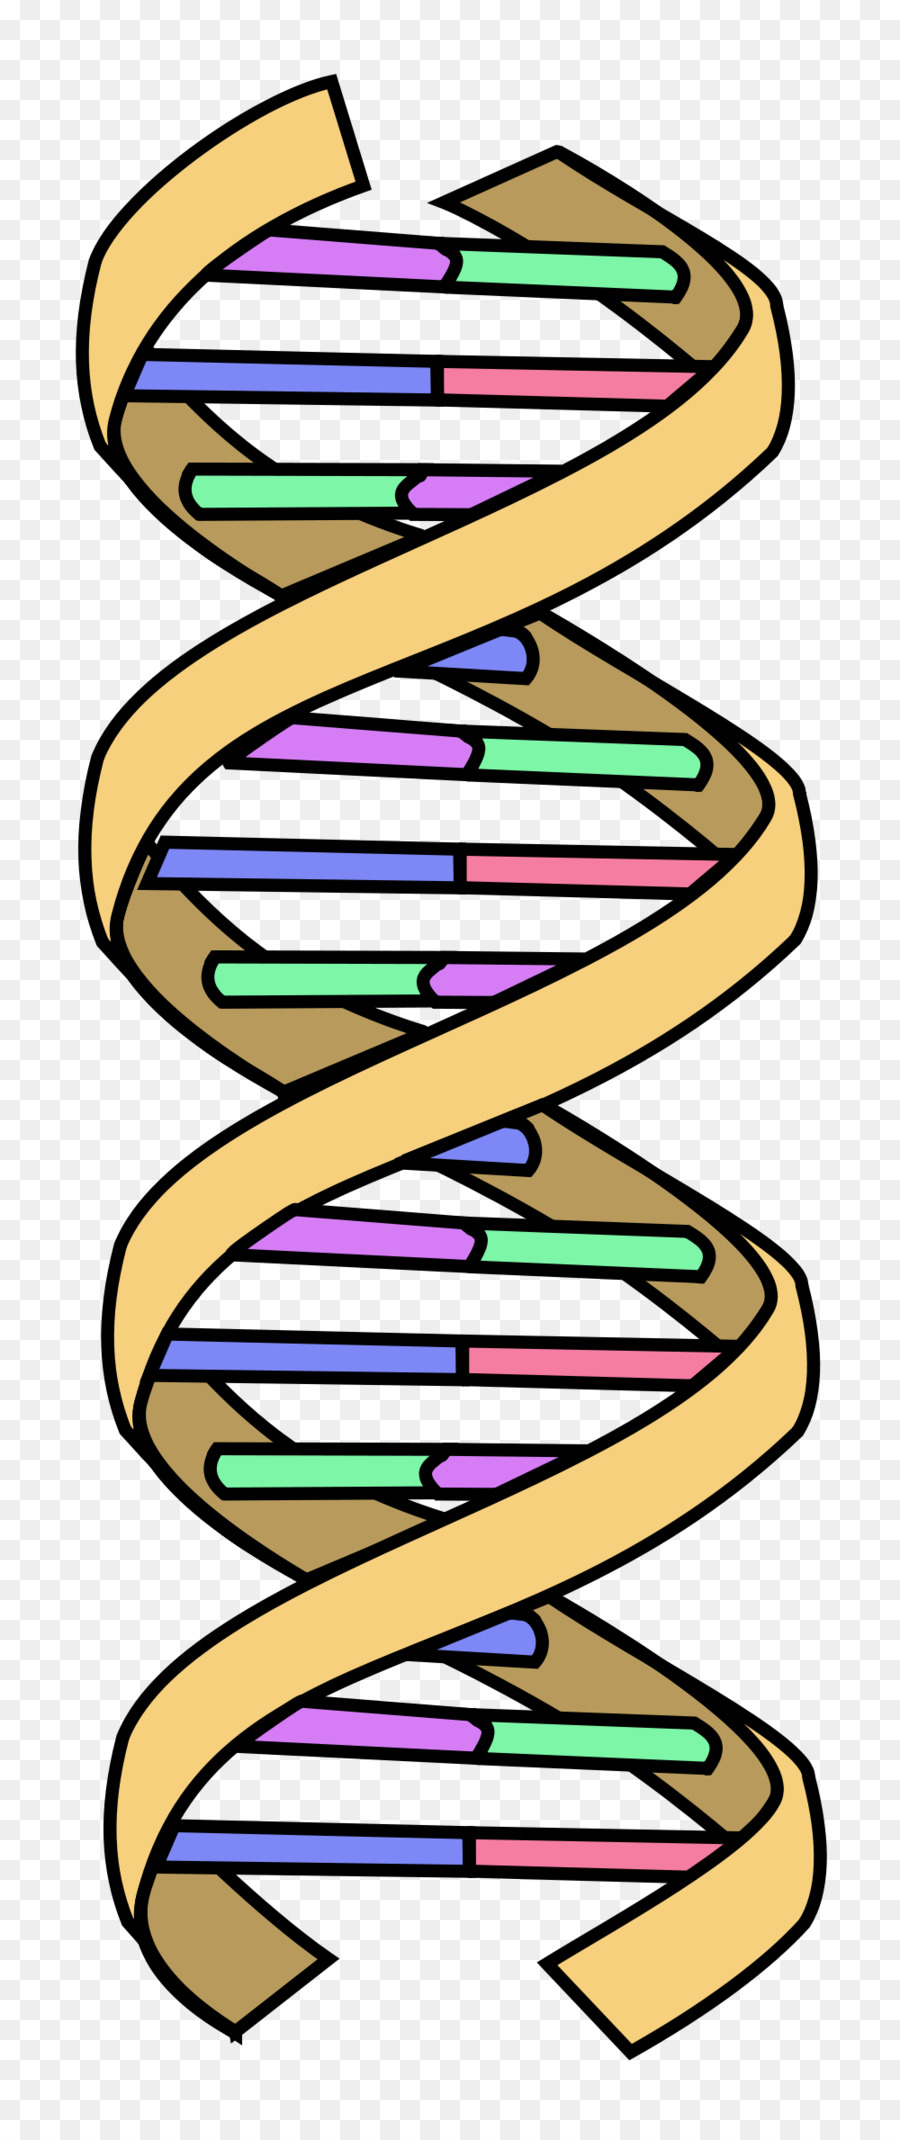 Double Helix png download - 1000*2368 - Free Transparent Dna png Download.  - CleanPNG / KissPNG